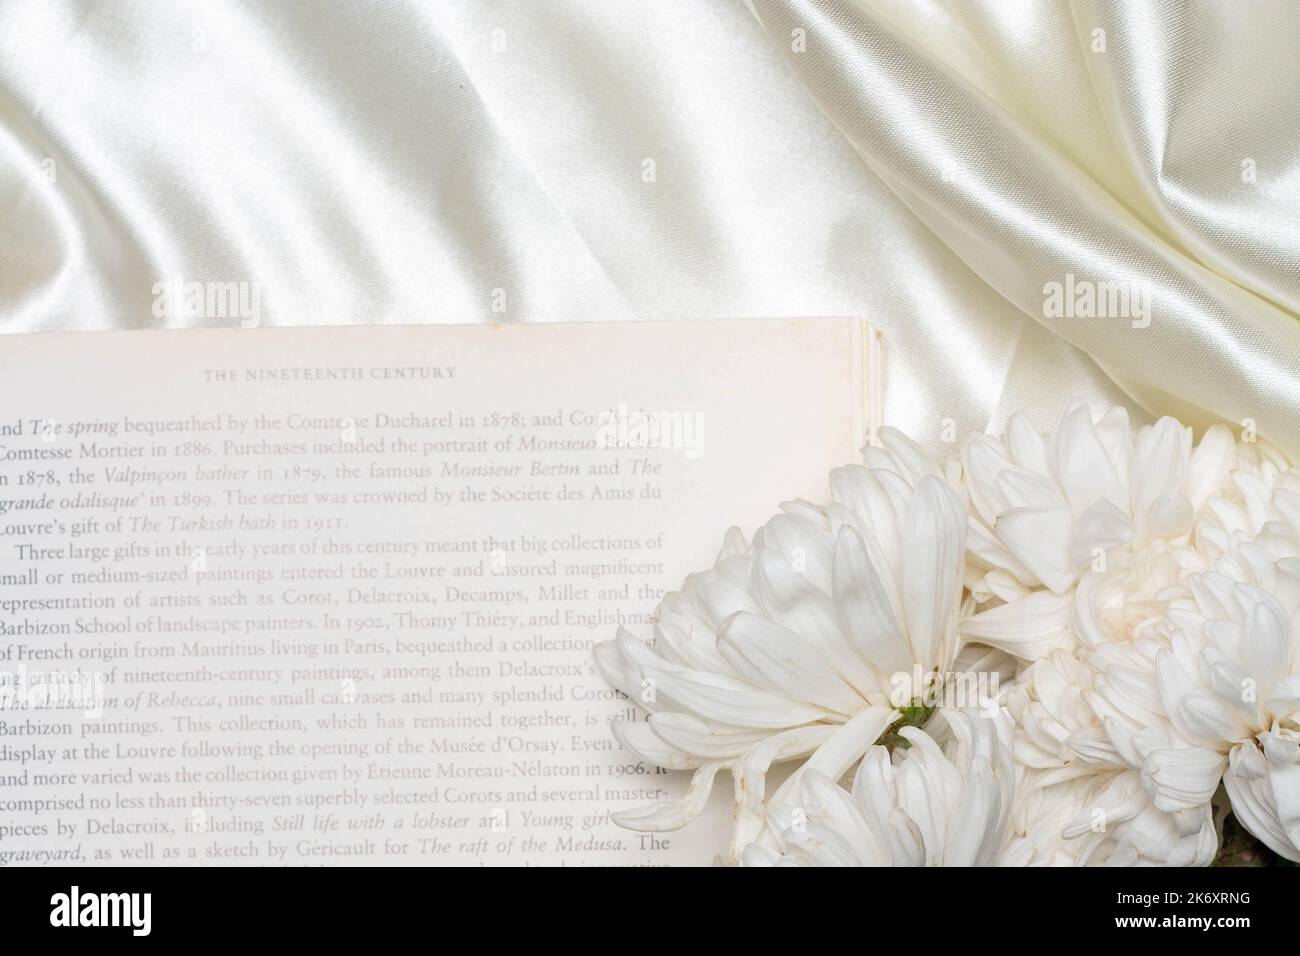 Beautiful flower concept, White chrysanthemum on the books over white cloth background. Stock Photo